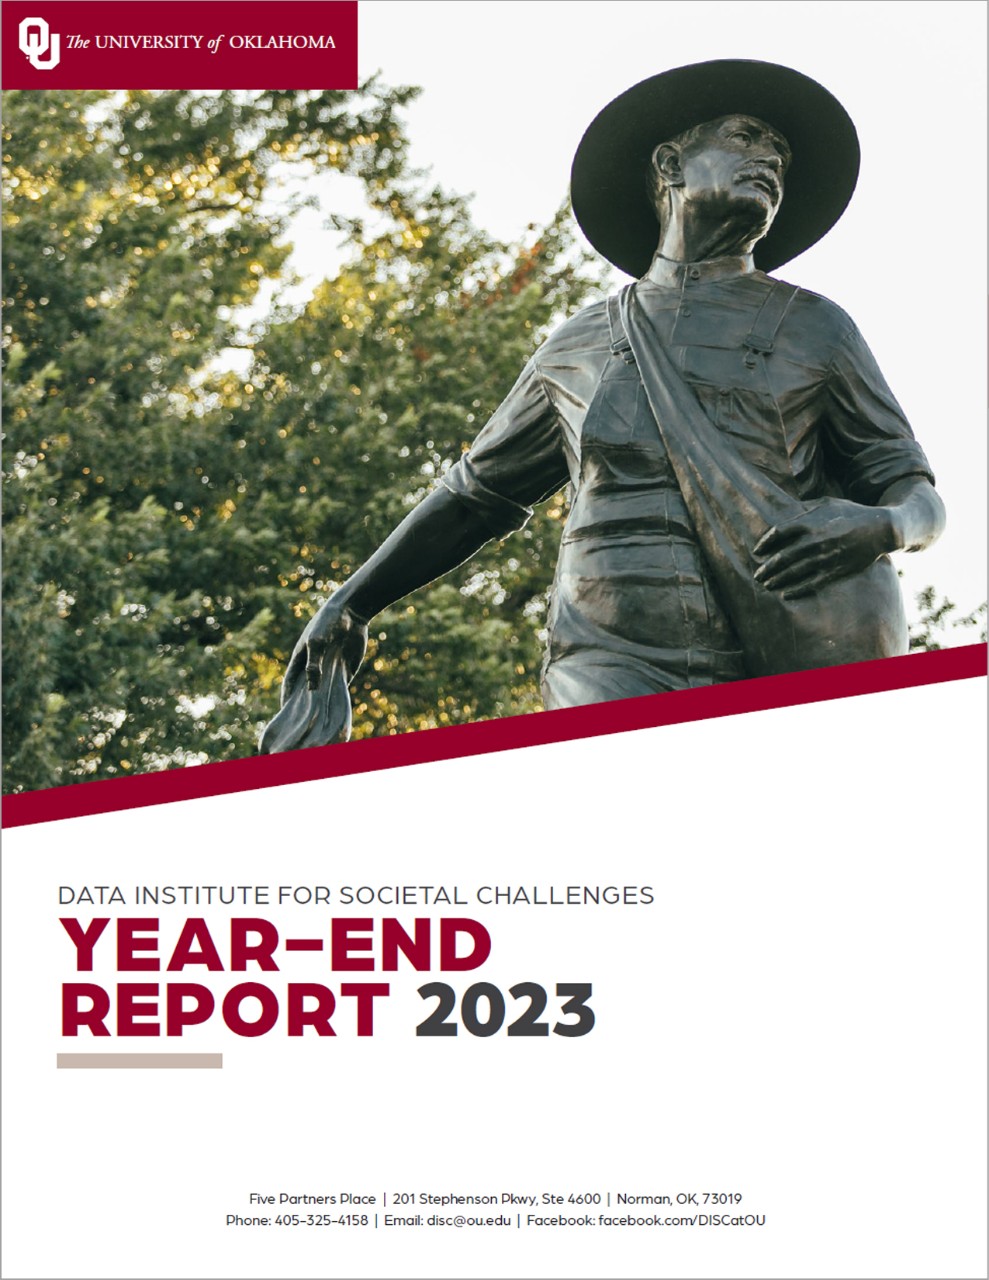 Data Institute for Societal Challenges DISC, FY 2022 Year-End Report